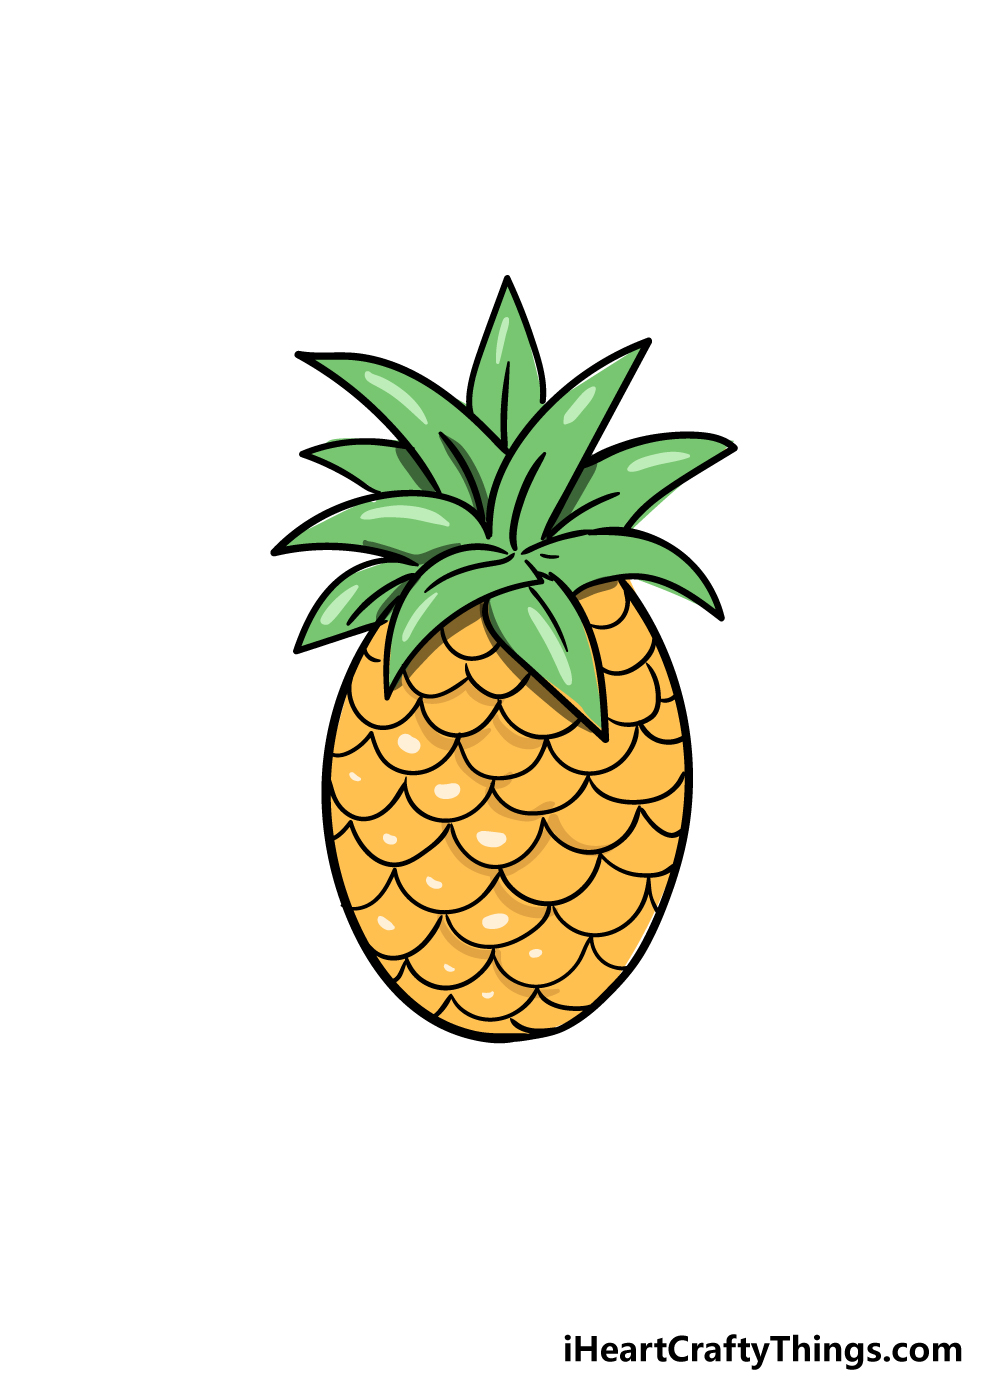 How To Draw A Pineapple For Kids